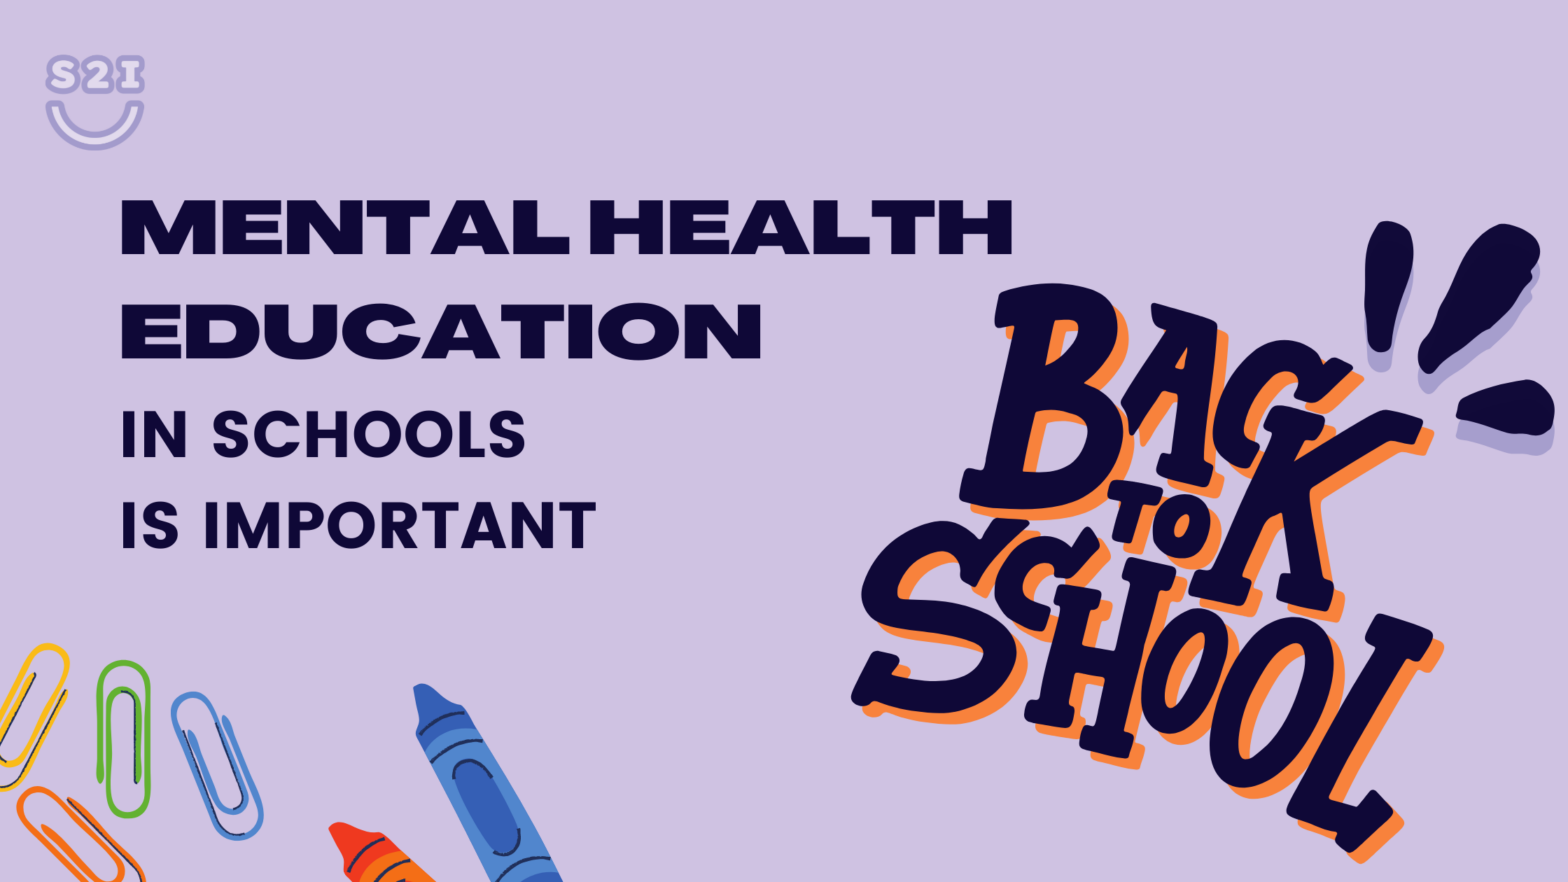 Mental health in education is important